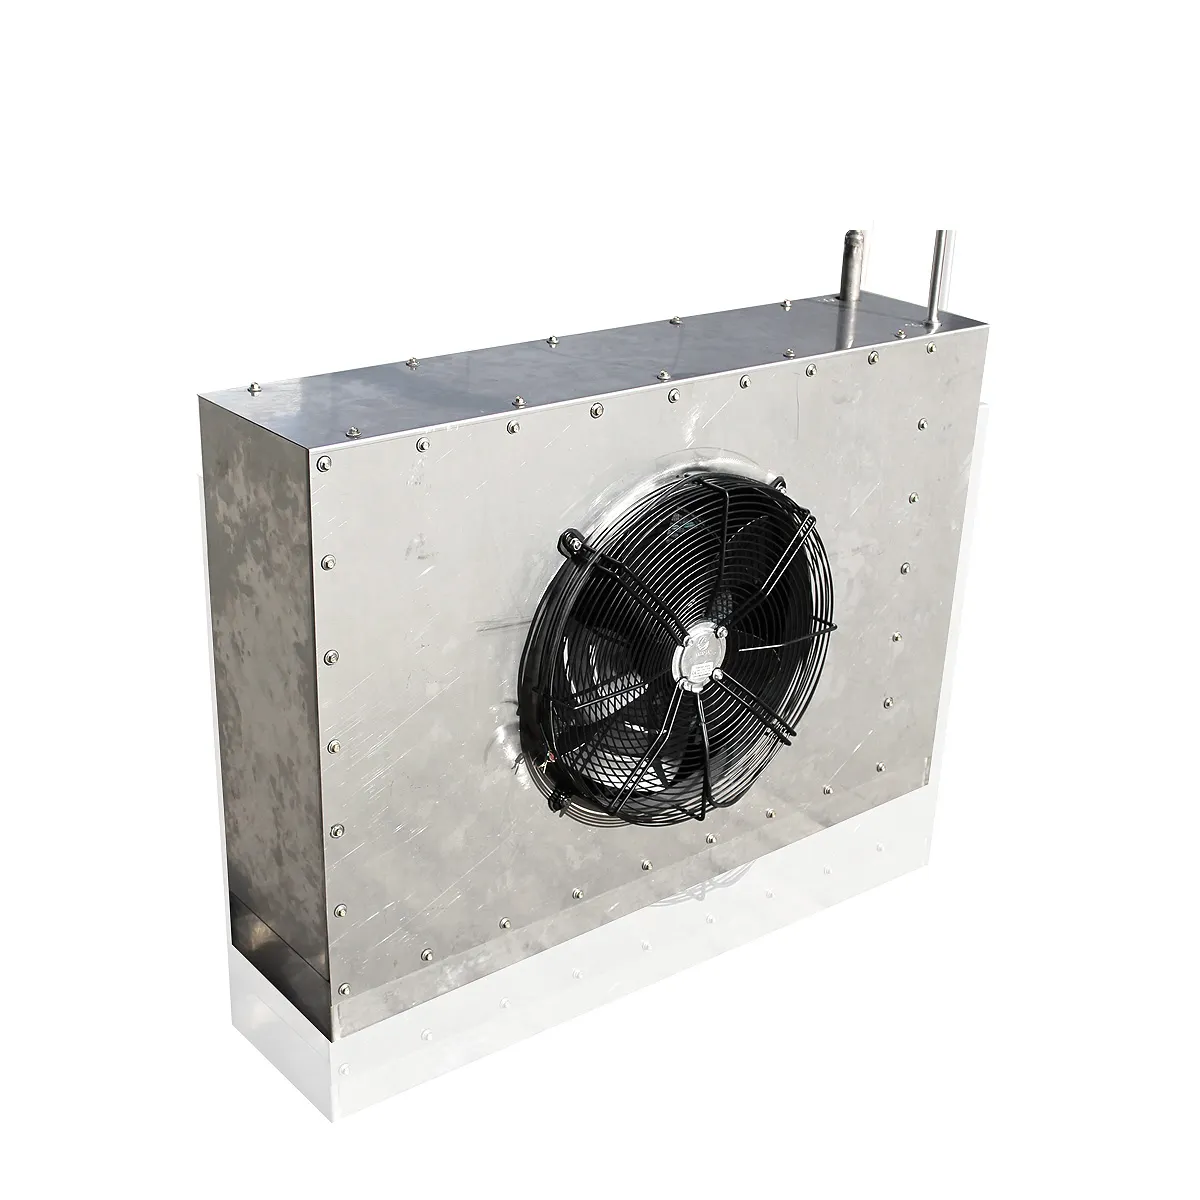 Cooler For Cold Room Air Cooled Evaporator Coils Of Stainless Steel Aluminum Fins And Copper Tube